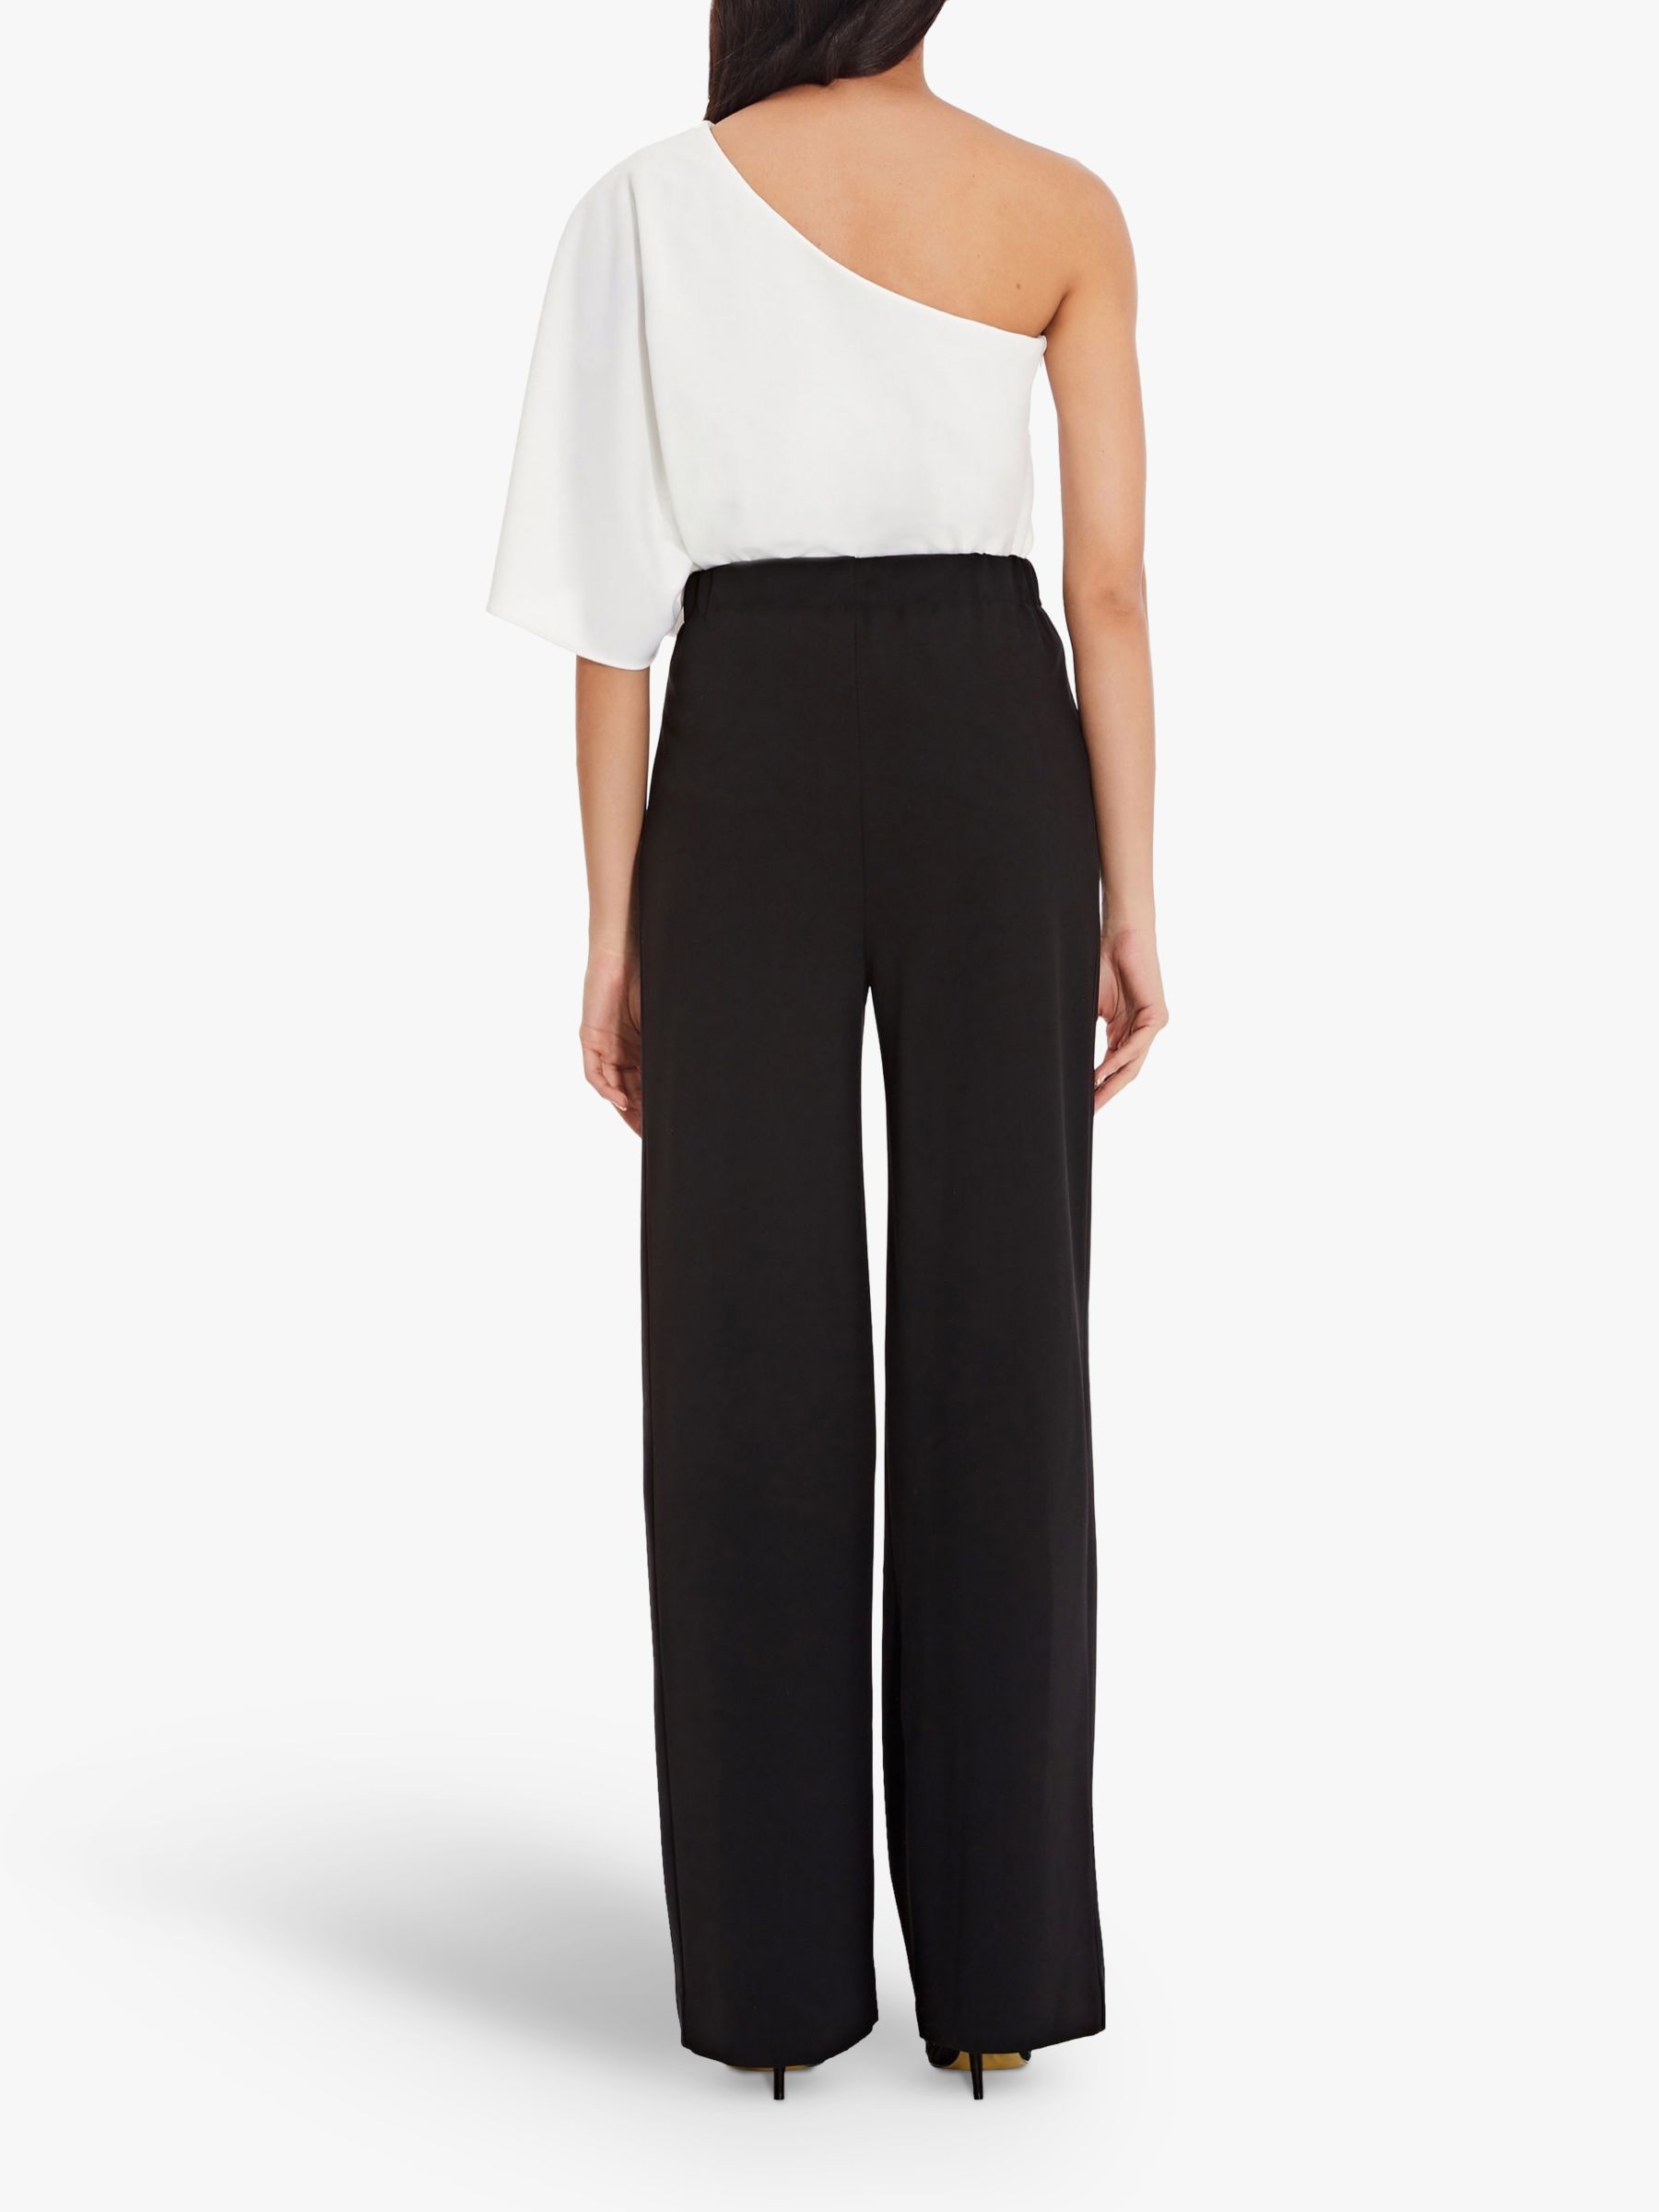 Buy Adrianna Papell Crepe Tuxedo Trousers, Black Online at johnlewis.com